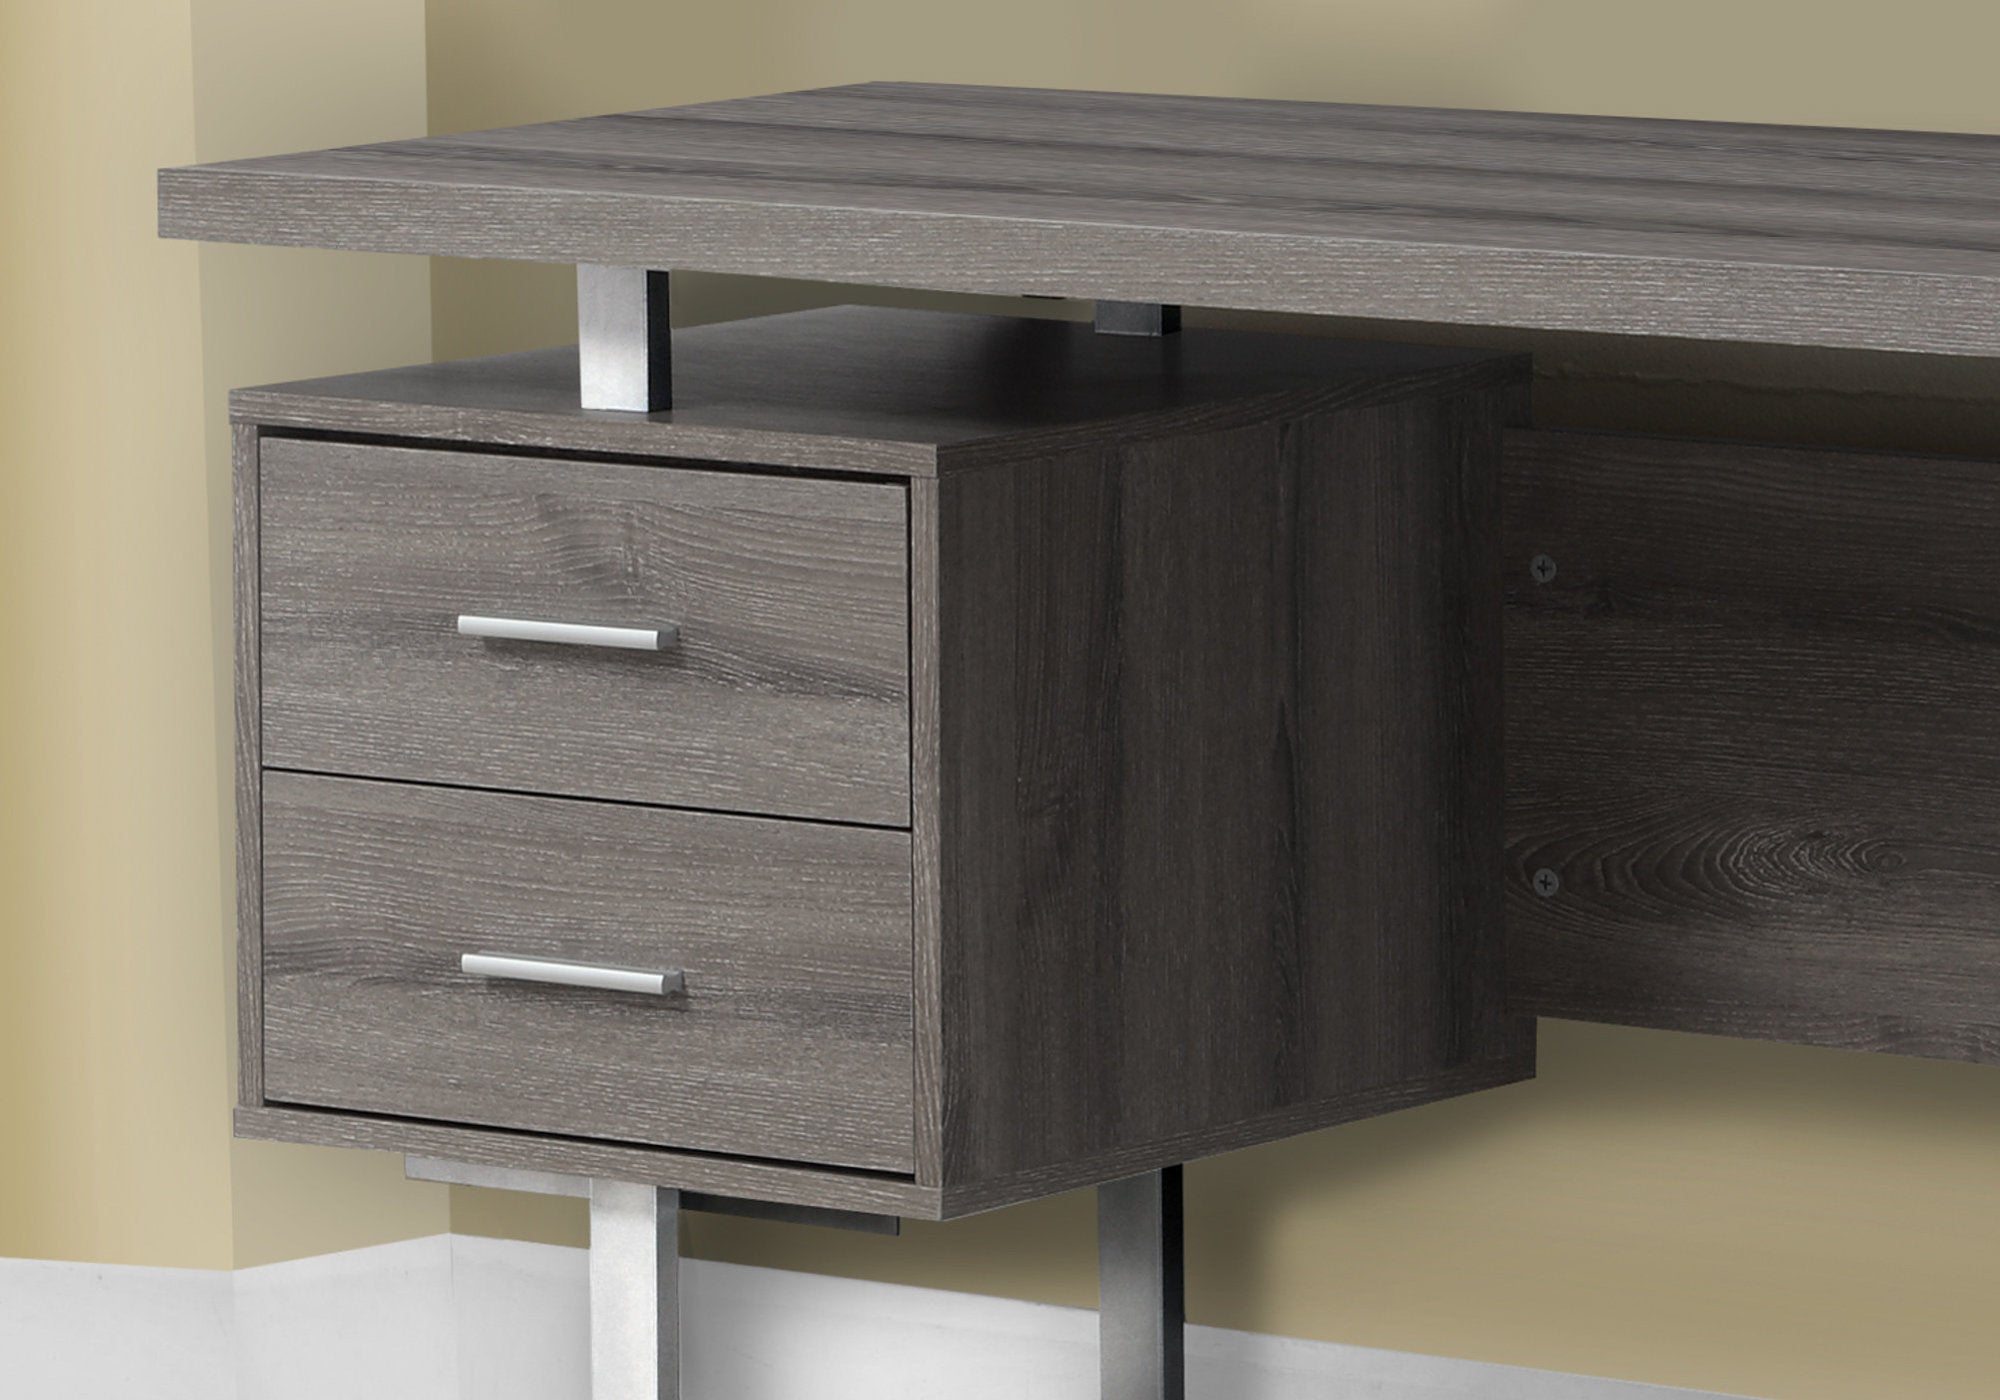 MN-957082    Computer Desk, Home Office, Laptop, Left, Right Set-Up, Storage Drawers, 60"L, Metal, Laminate, Dark Taupe, Silver, Contemporary, Modern